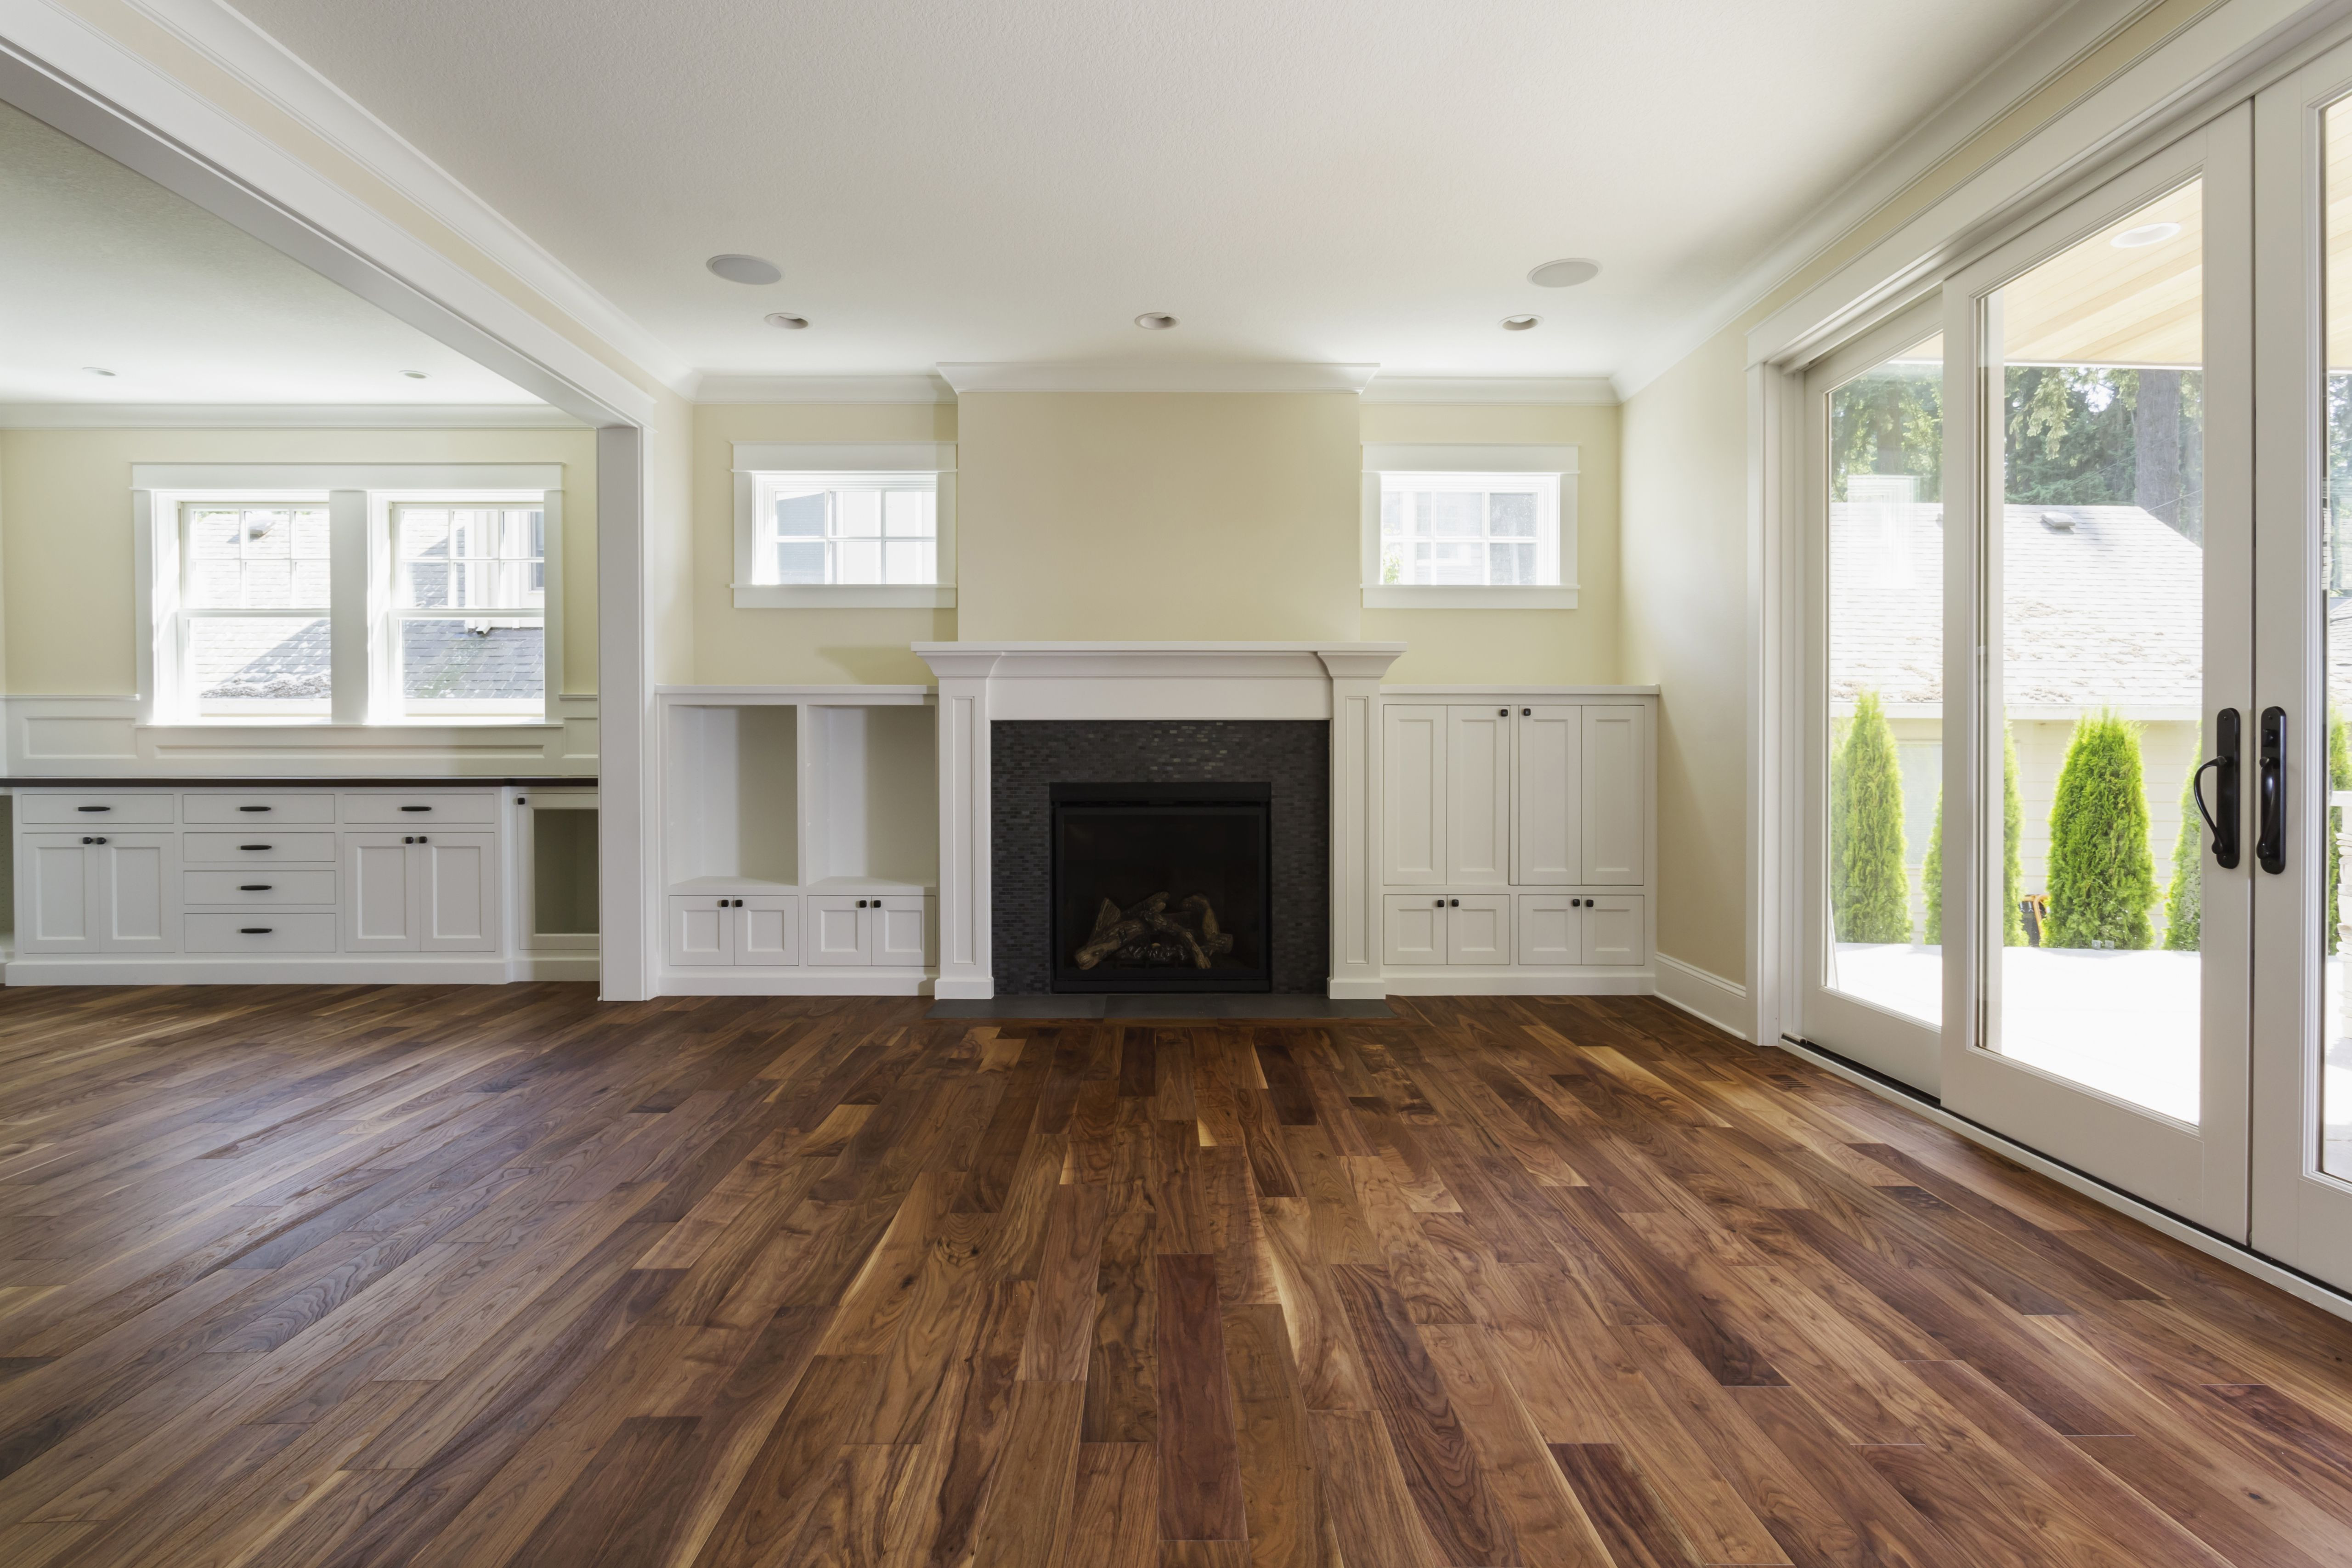 20 Fashionable Hardwood Floor Living Room Ideas 2022 free download hardwood floor living room ideas of the pros and cons of prefinished hardwood flooring with fireplace and built in shelves in living room 482143011 57bef8e33df78cc16e035397